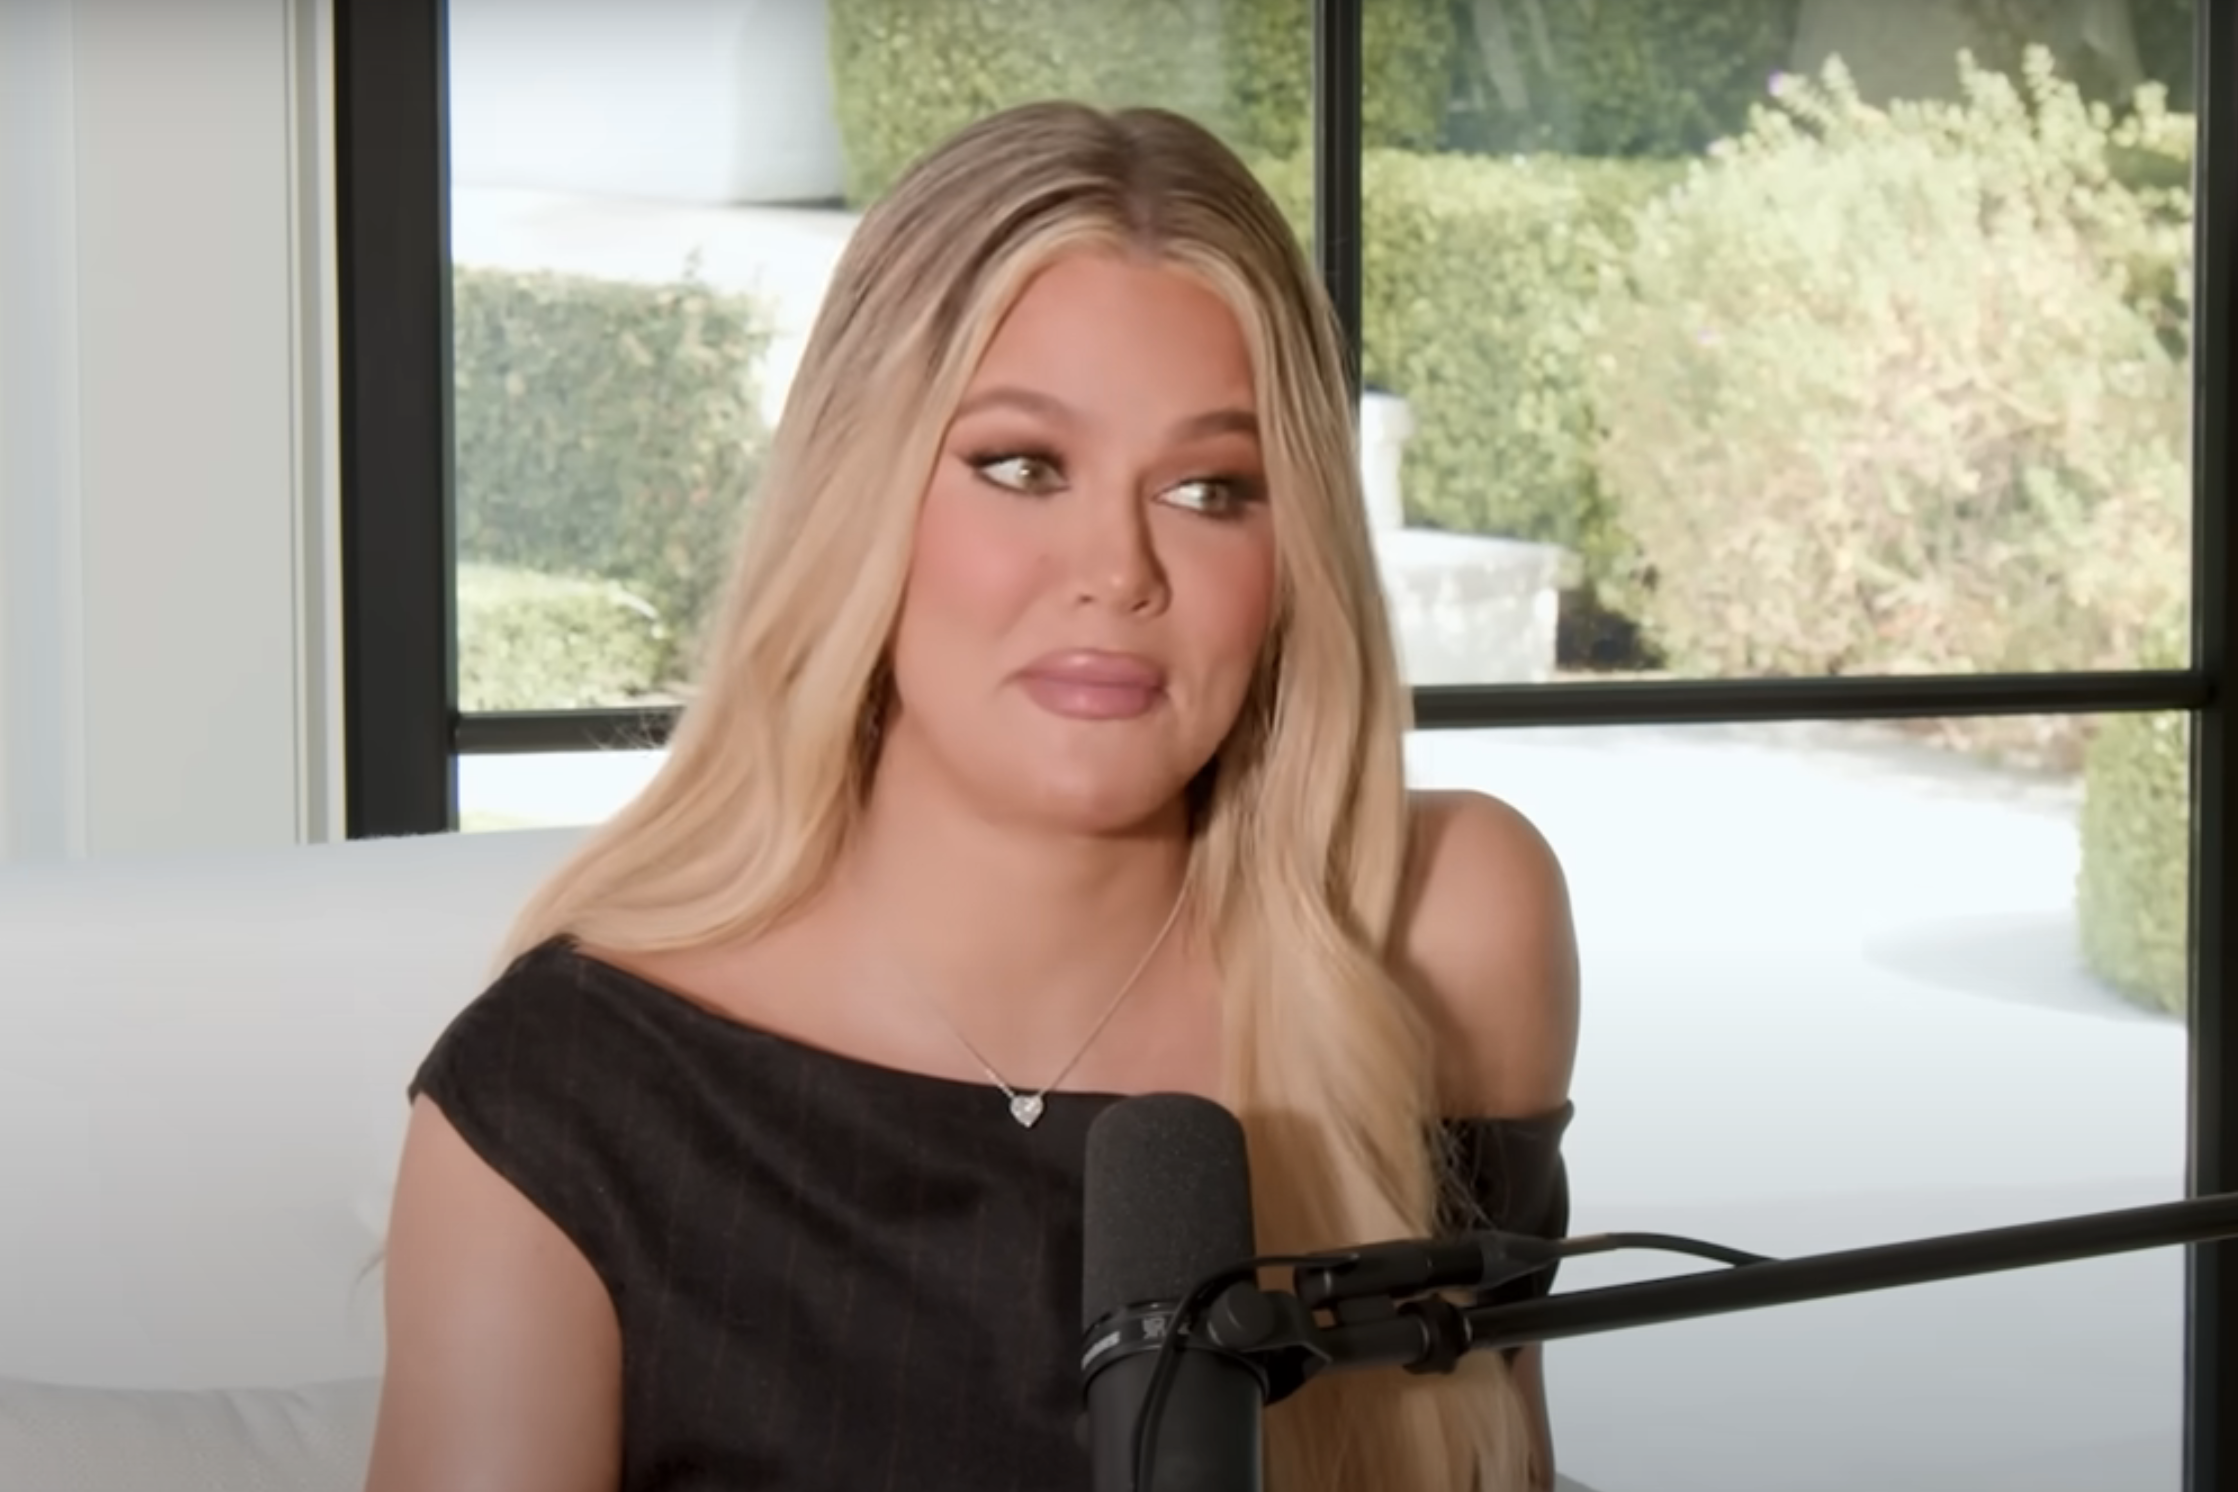 Khloé Kardashian Said That Tristan Thompson “Was So Offended” When She Made Him Do Three Paternity Tests Because Their Son Tatum Looks So Much Like Her Brother Rob Kardashian